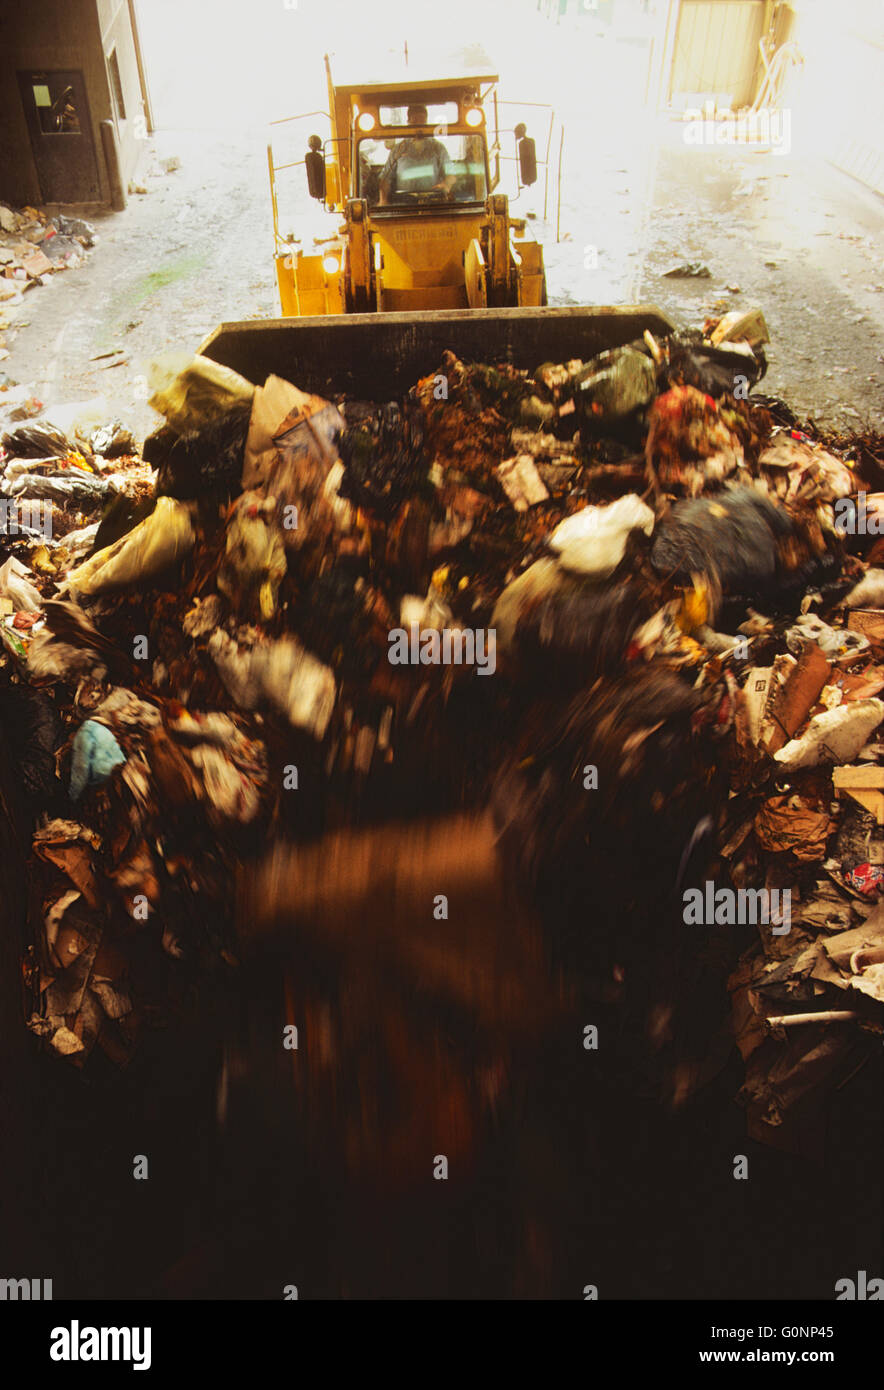 HEAVY EQUIPMENT SORTS TRASH AT A TRANSFER STATION AT CLARKSTOWN, NEW YORK, RECYCLING CENTER & LANDFILL Stock Photo